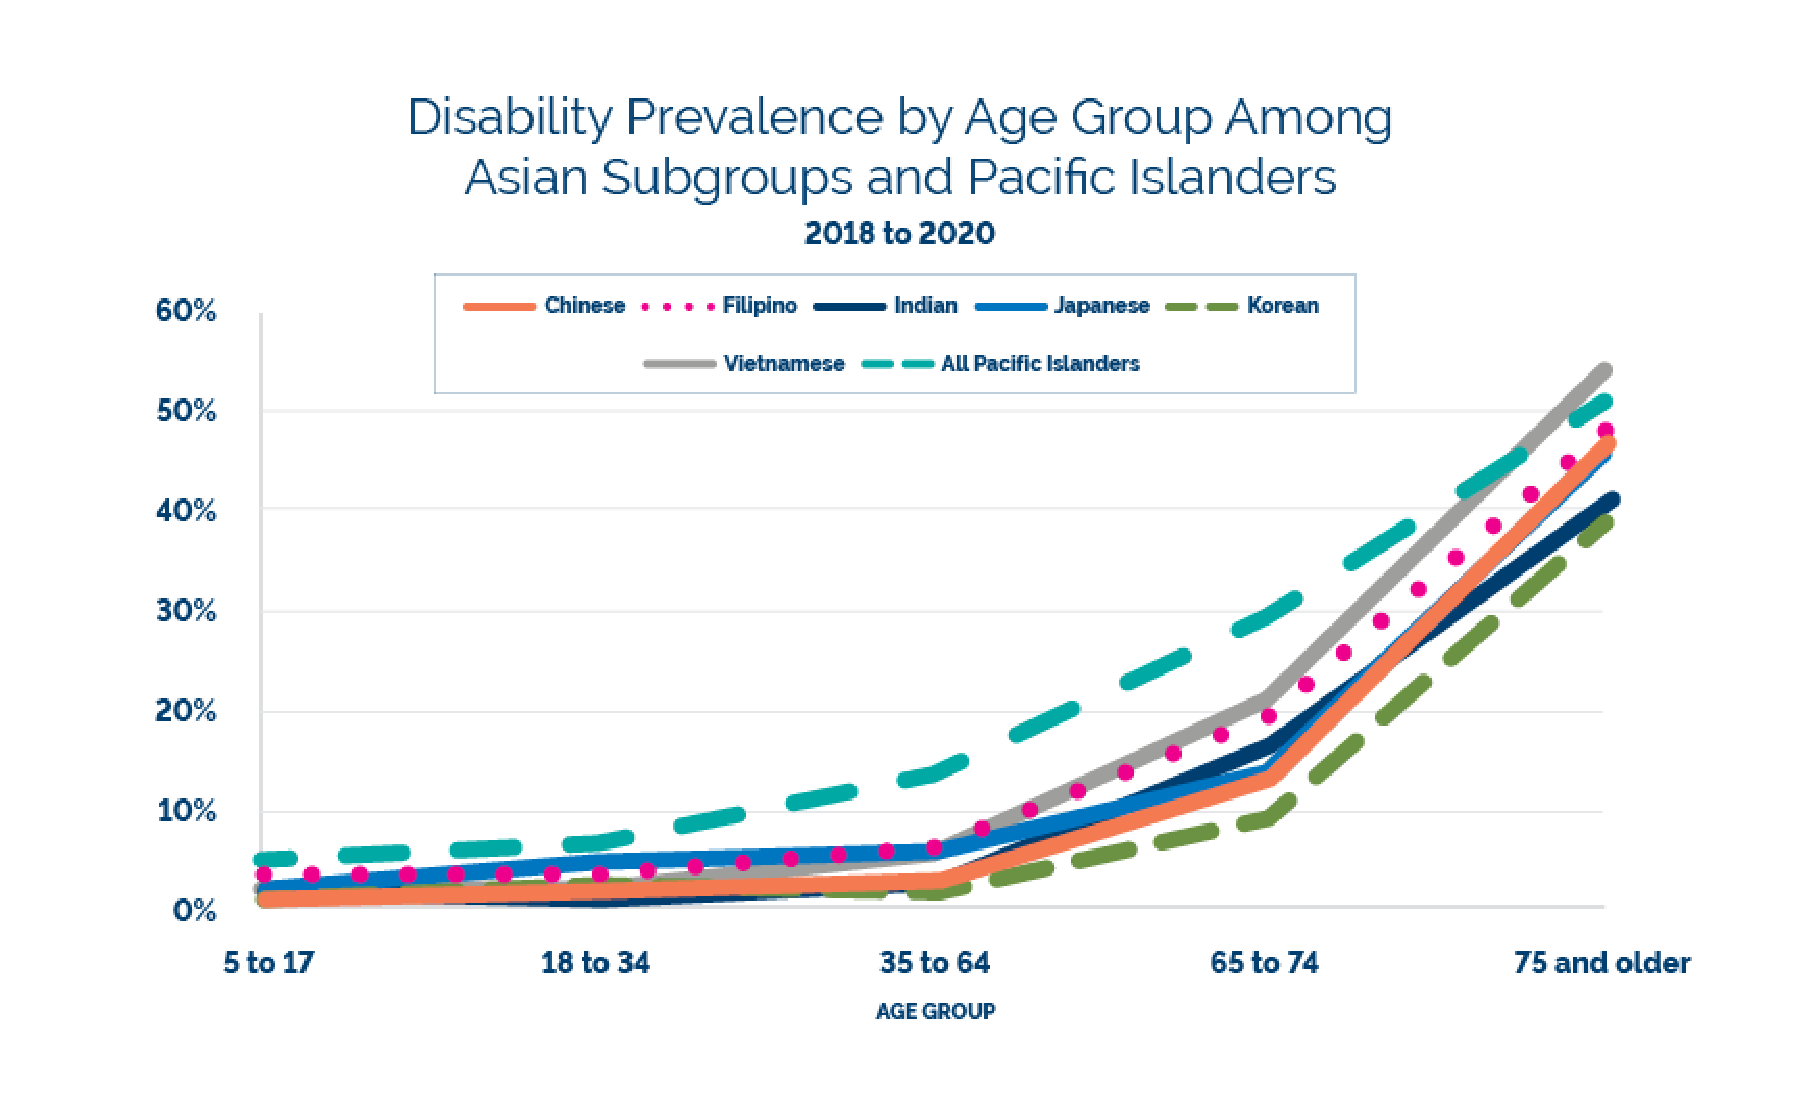 Disability Prevalence by Age Group Among Asian Subgroups and Pacific Islanders